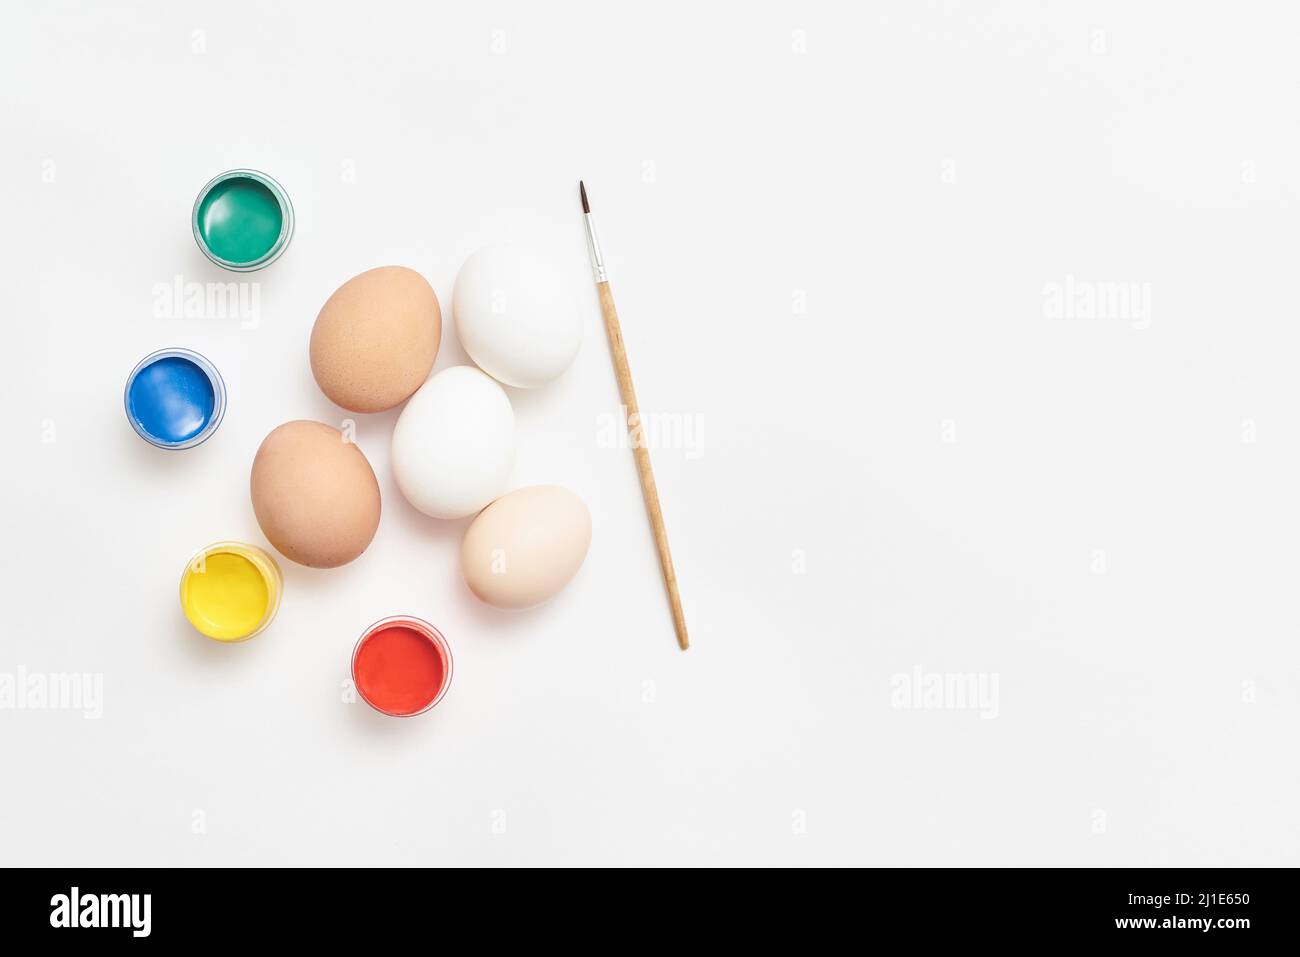 Eggs and paints for Easter on a white background Stock Photo